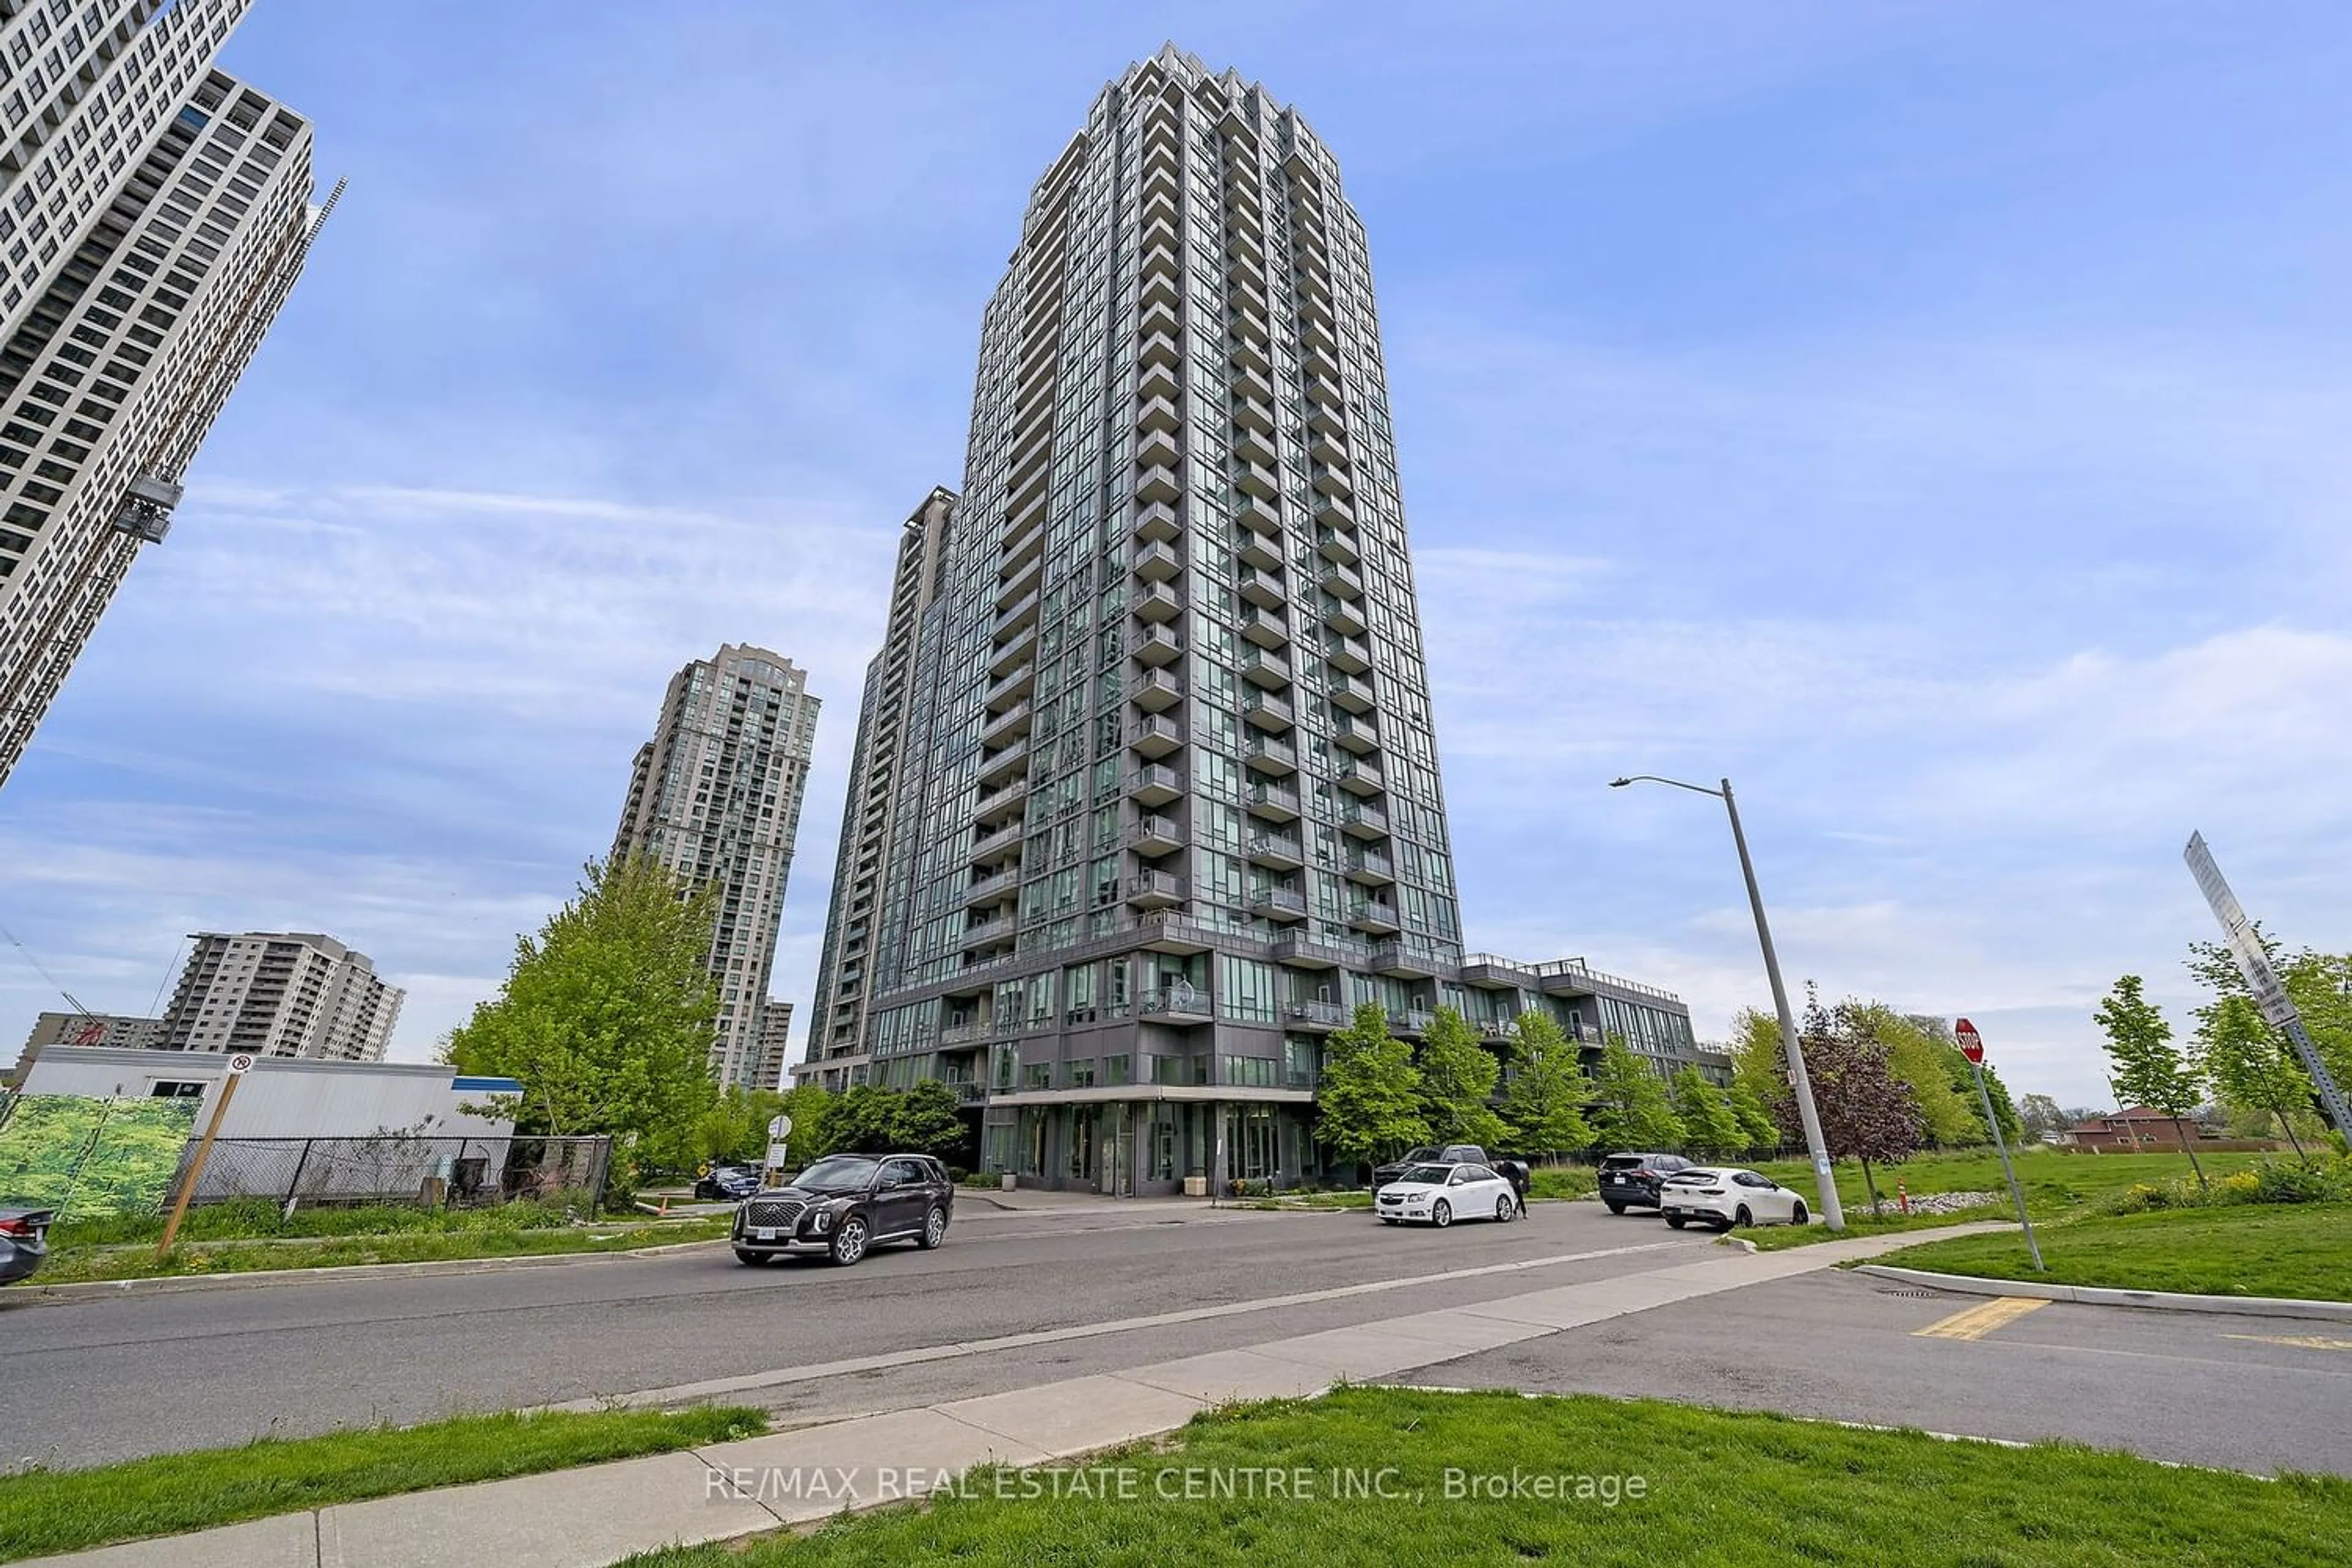 A pic from exterior of the house or condo for 3525 Kariya Dr #3202, Mississauga Ontario L5B 0C2